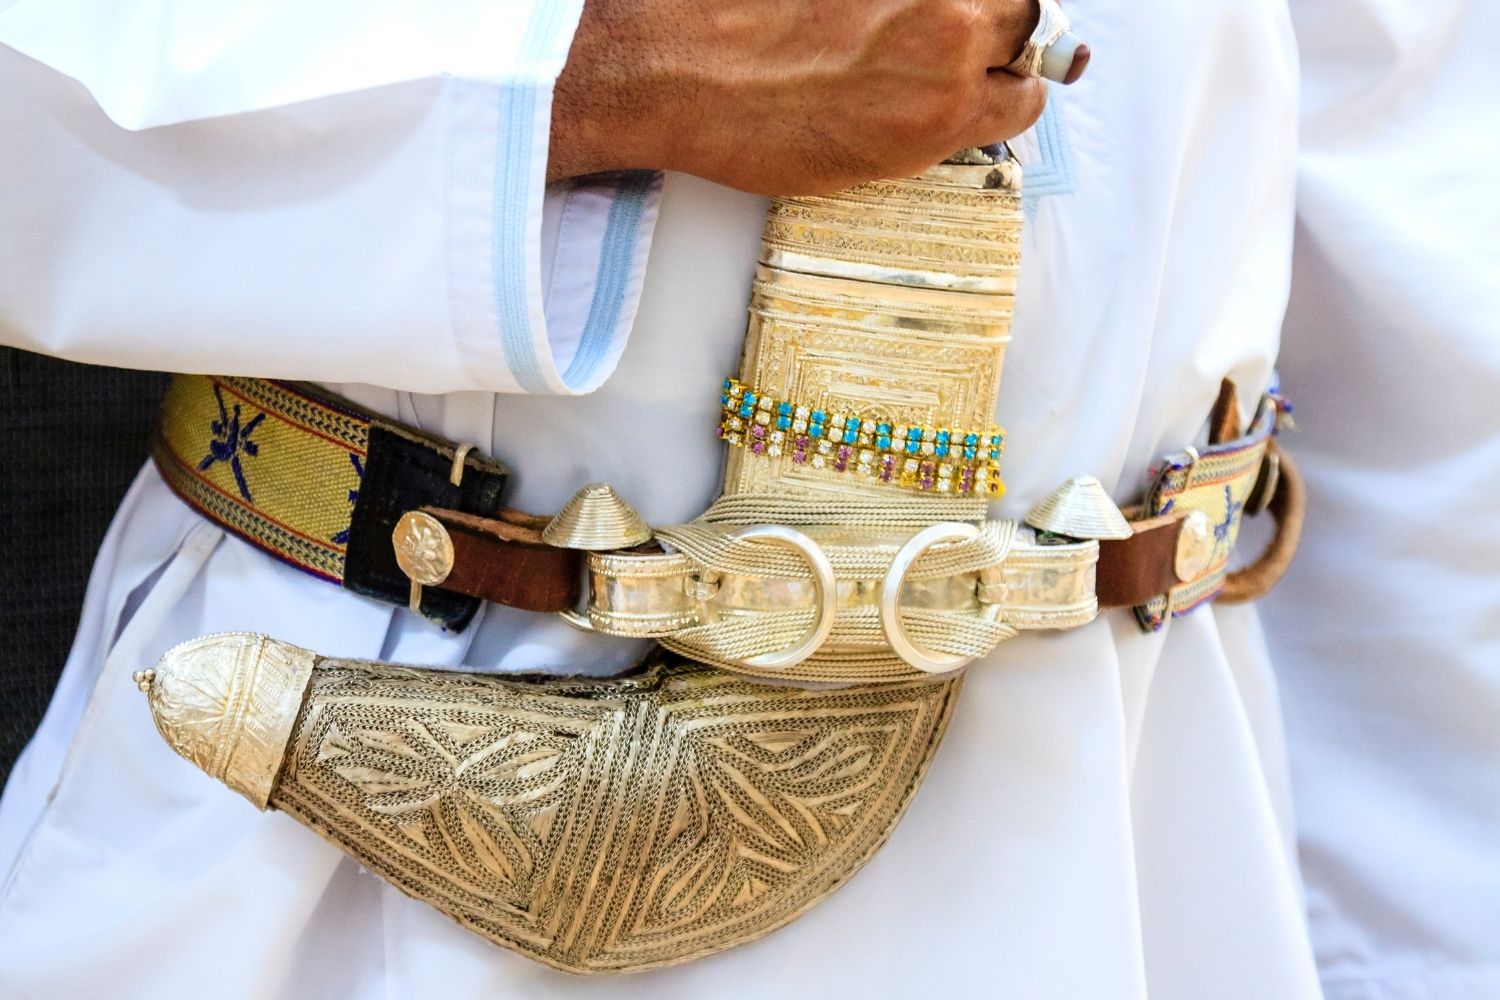 The national symbol of Oman are crossed khanjars